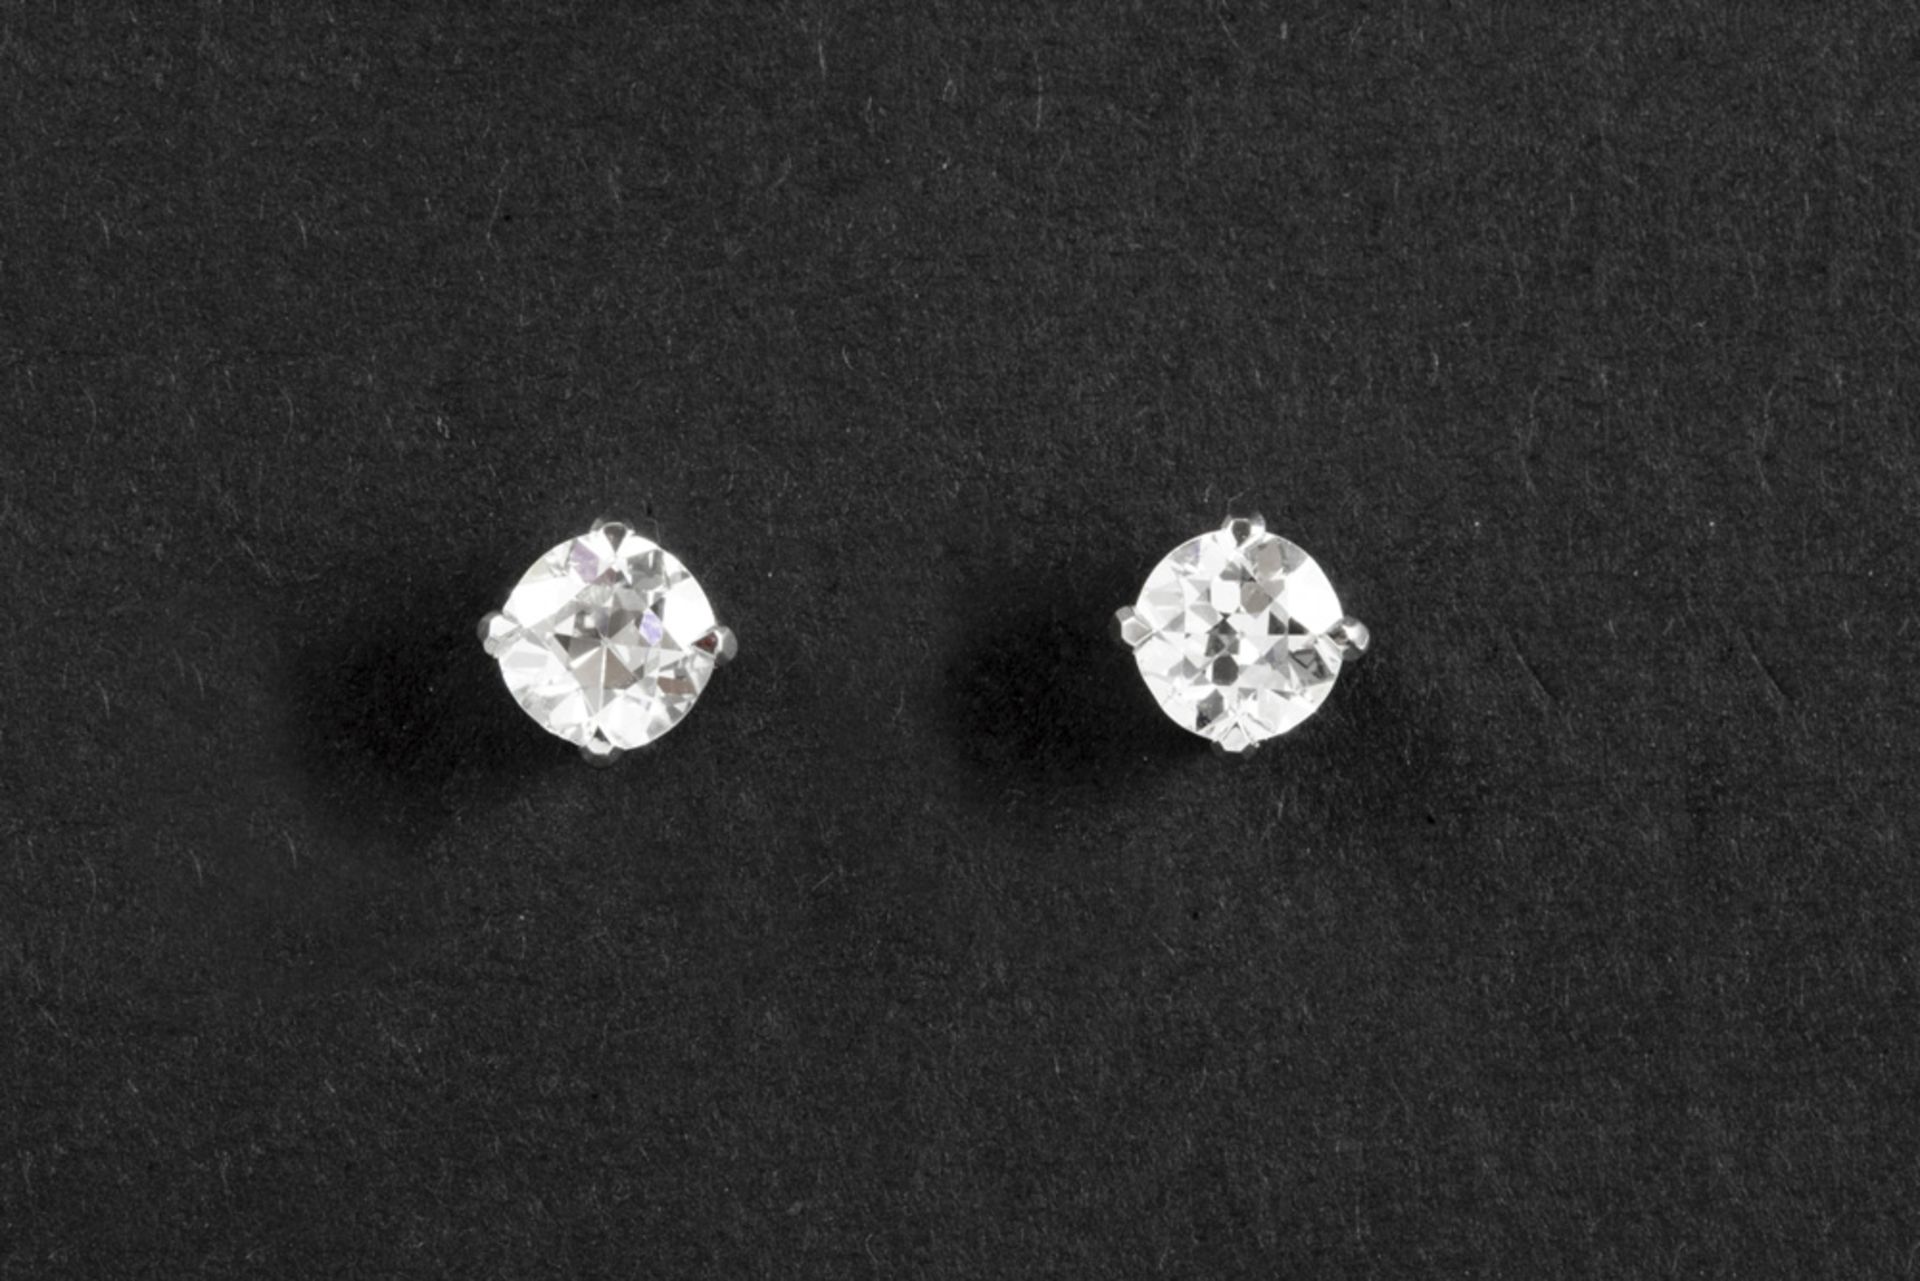 pair of earrings in white gold (18 carat) each with one stone - in total : 1,26 carat of quality old